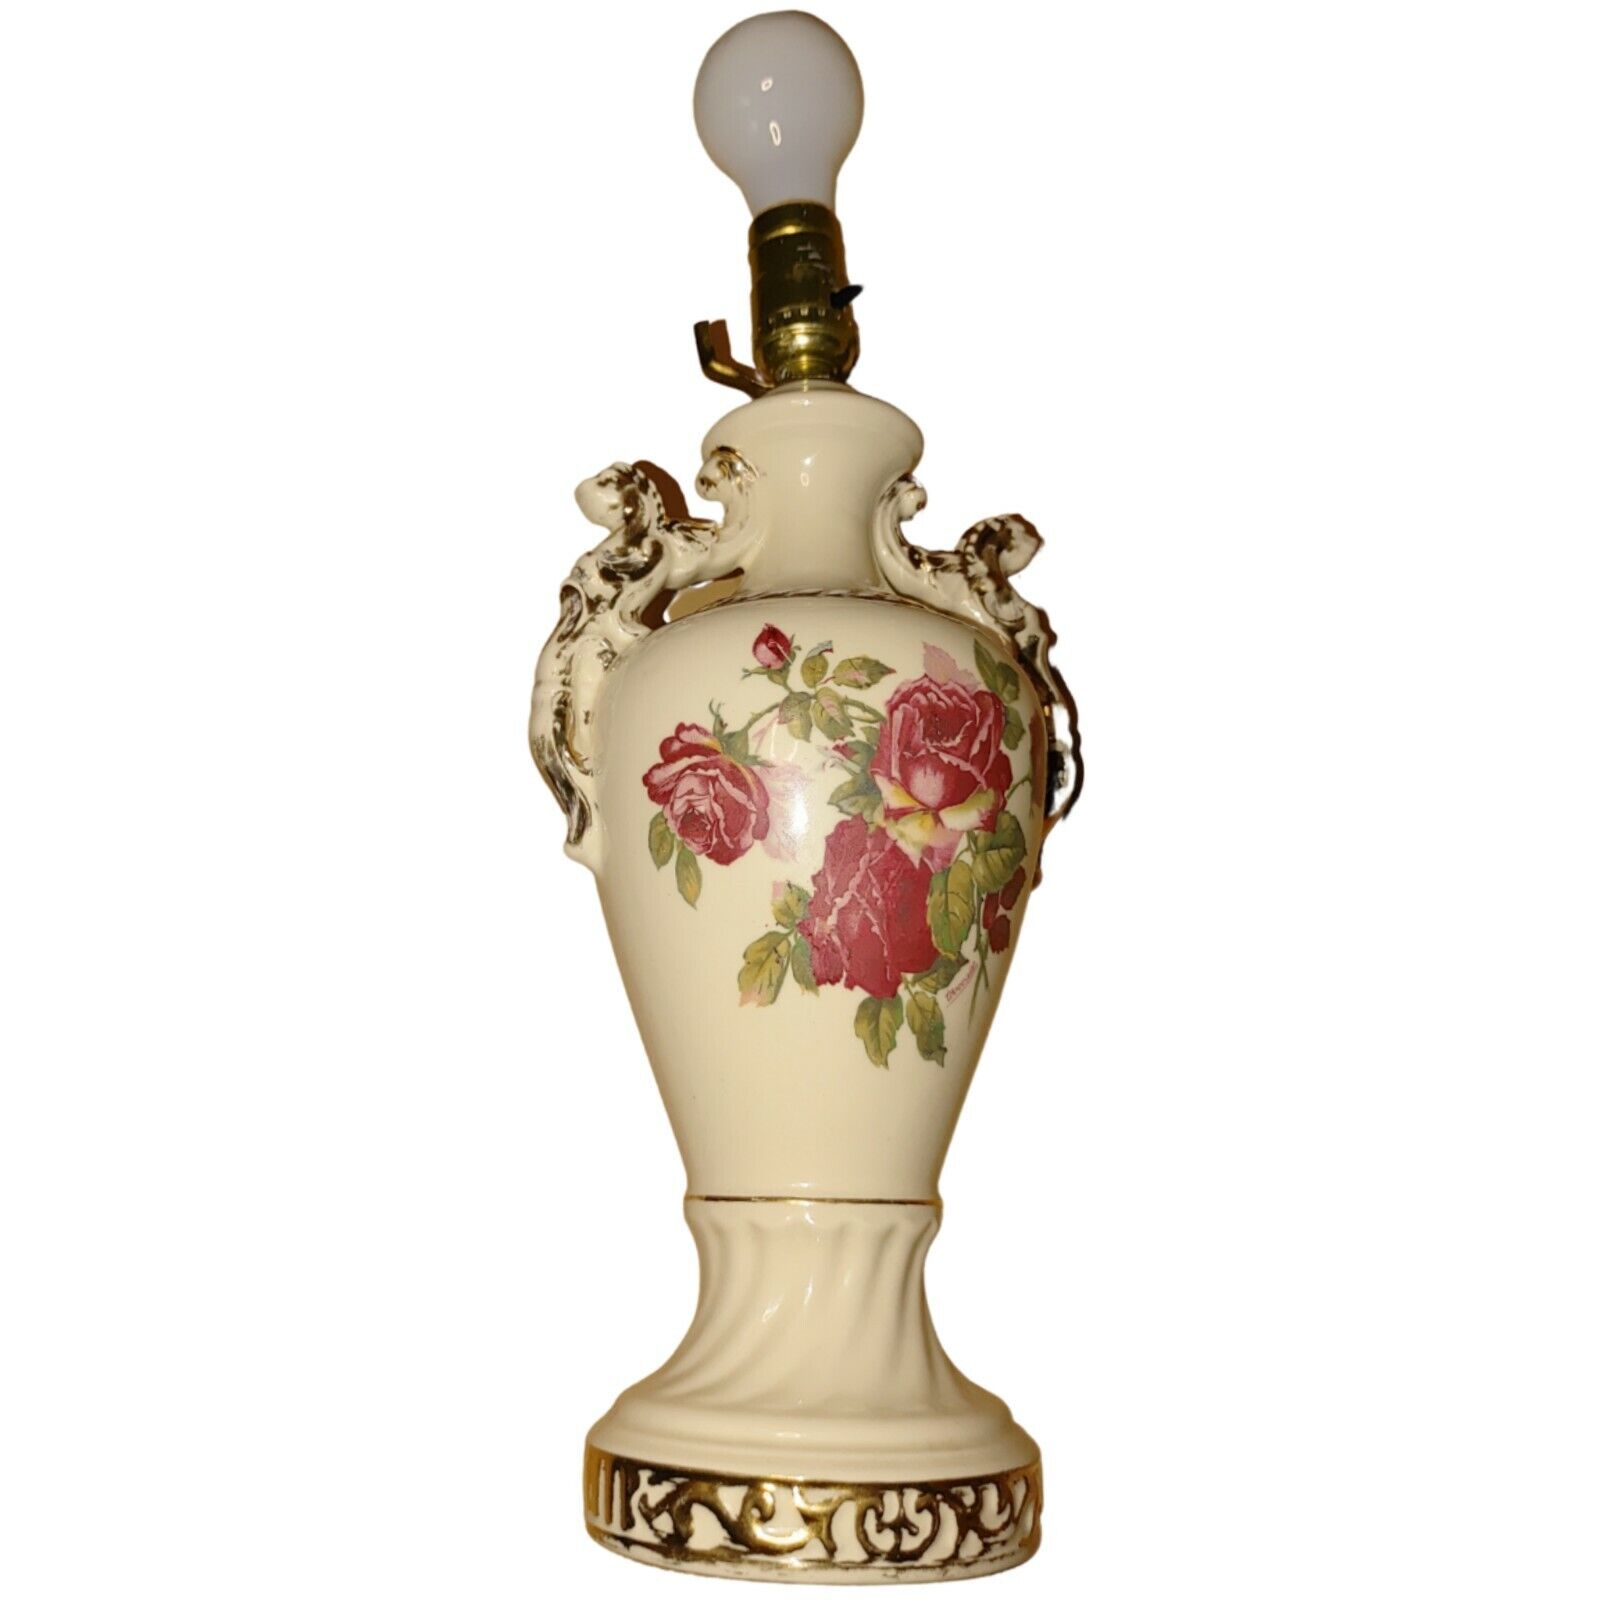 Vintage 1940's China Lamp Ruby Roses Gold Accents Signed Worrall.